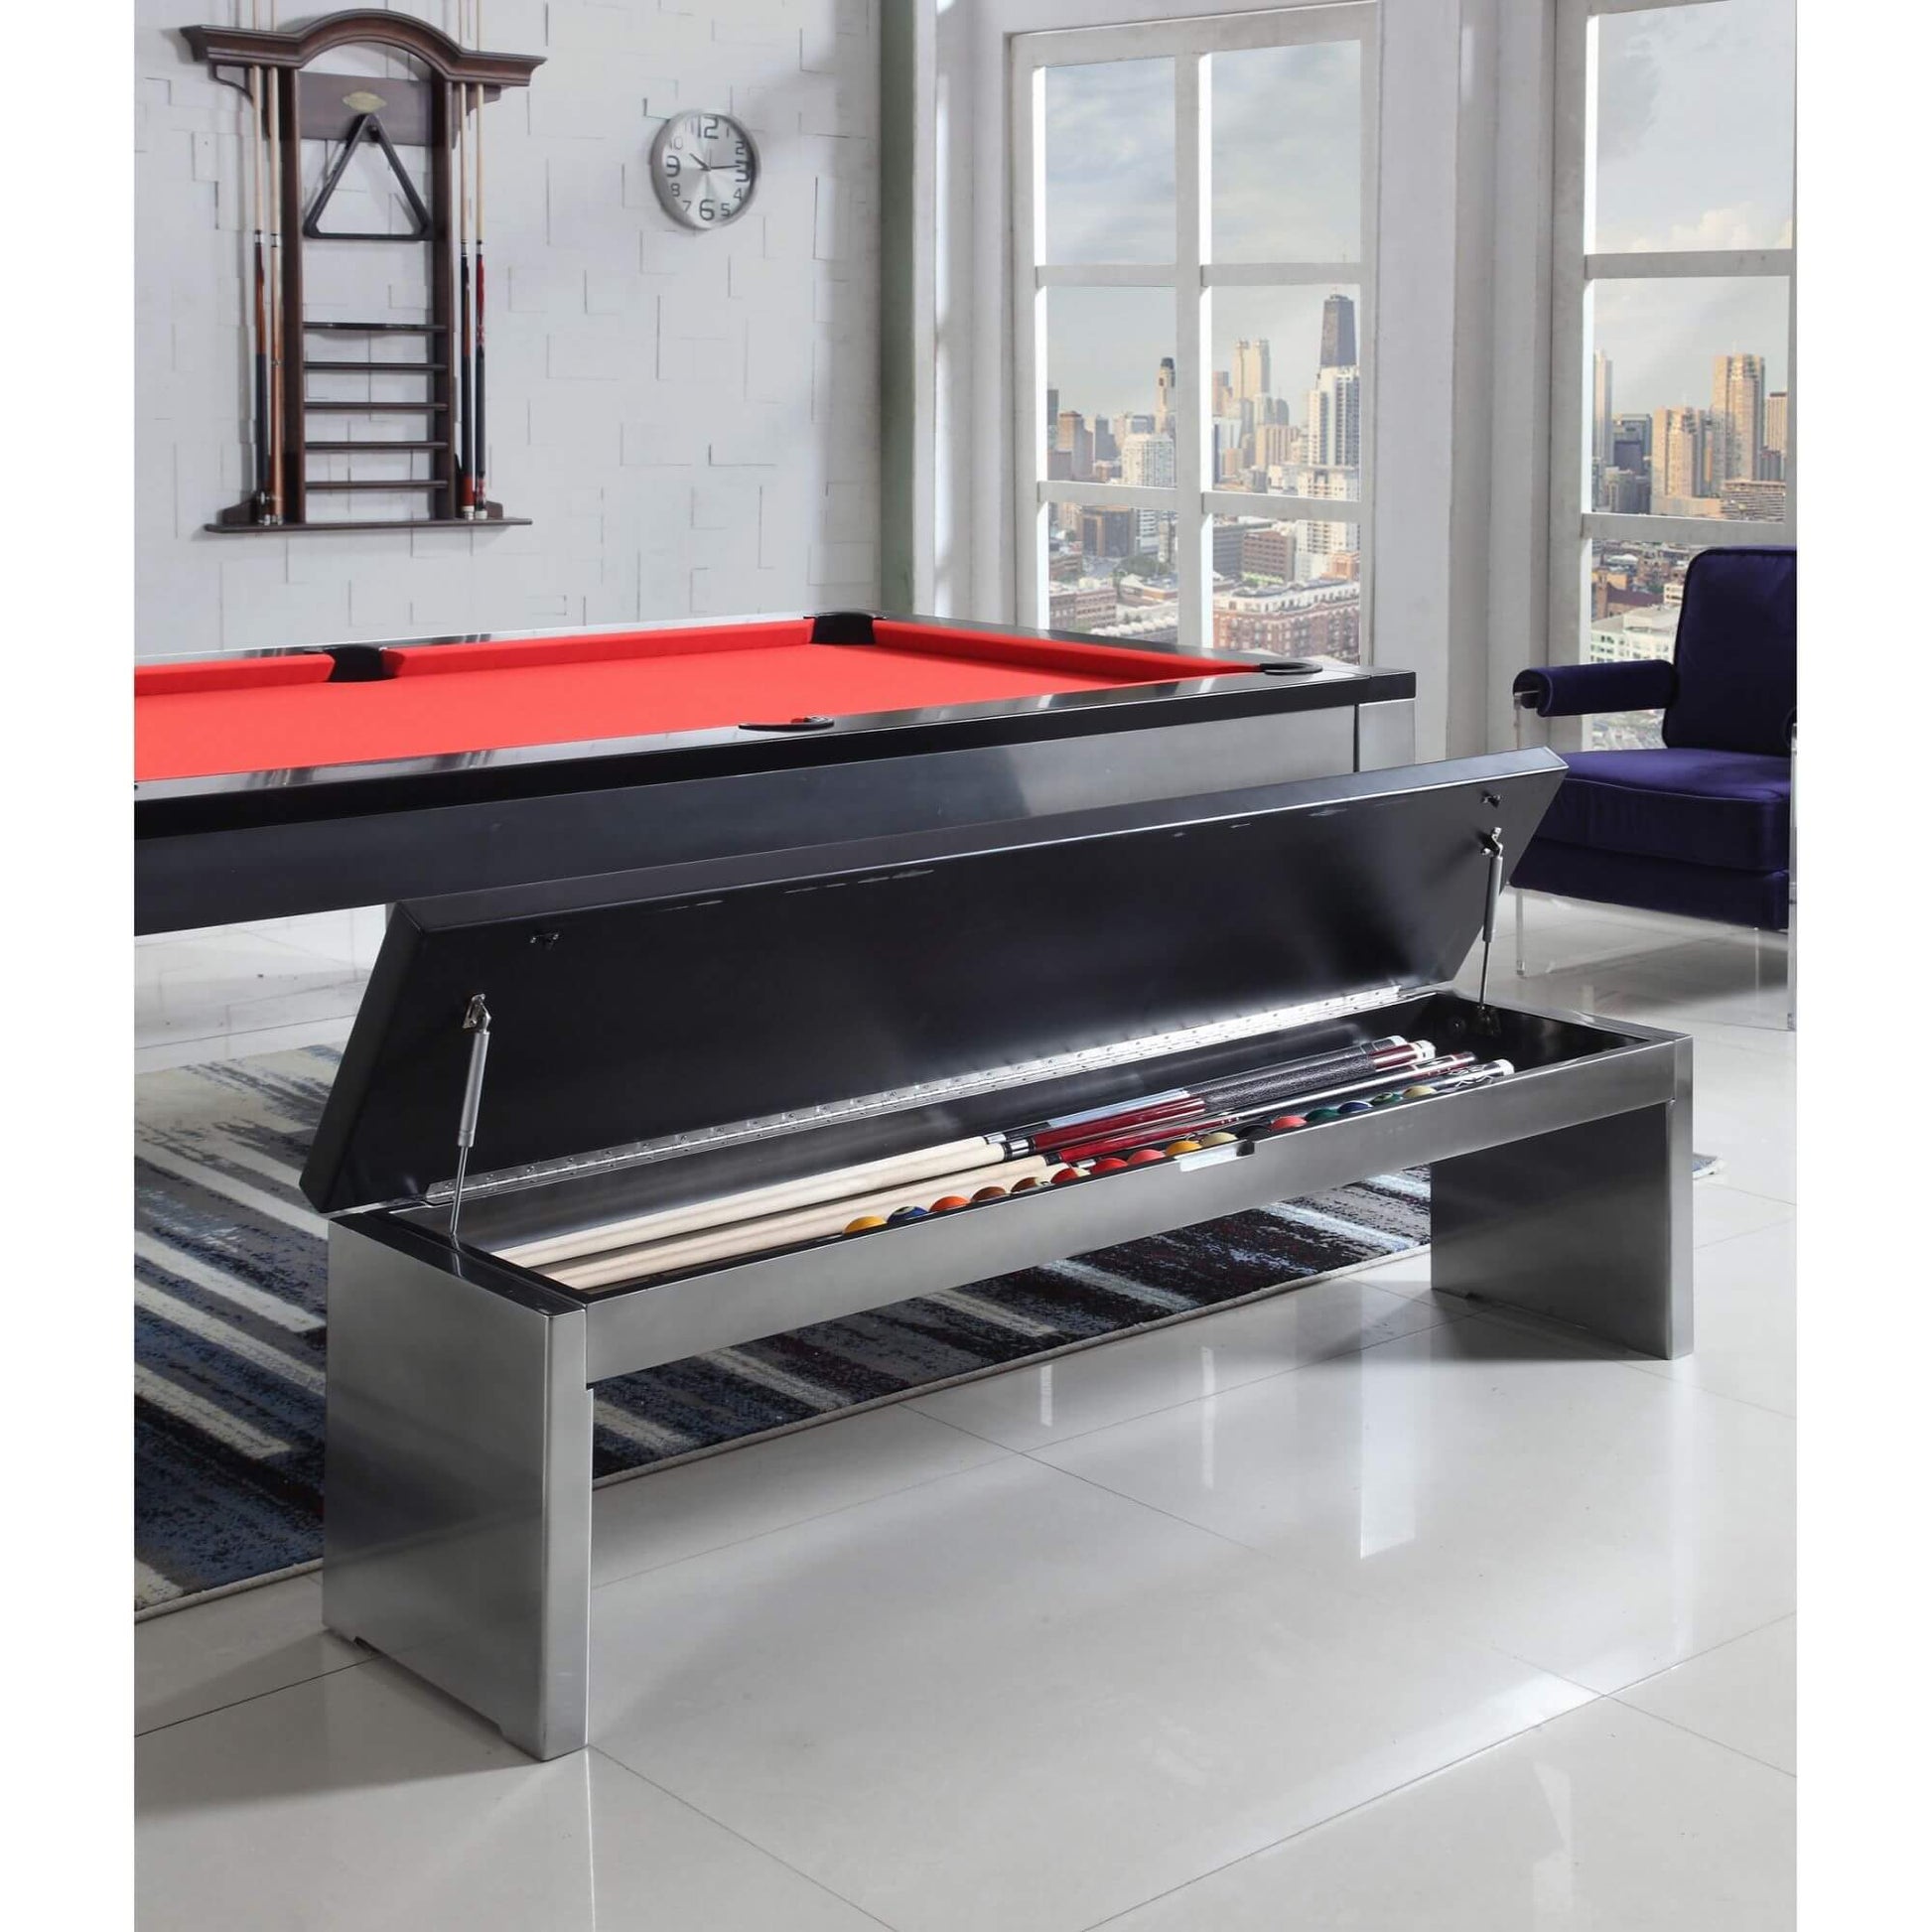 Playcraft Monaco Slate Pool Table with Dining Top - Gaming Blaze